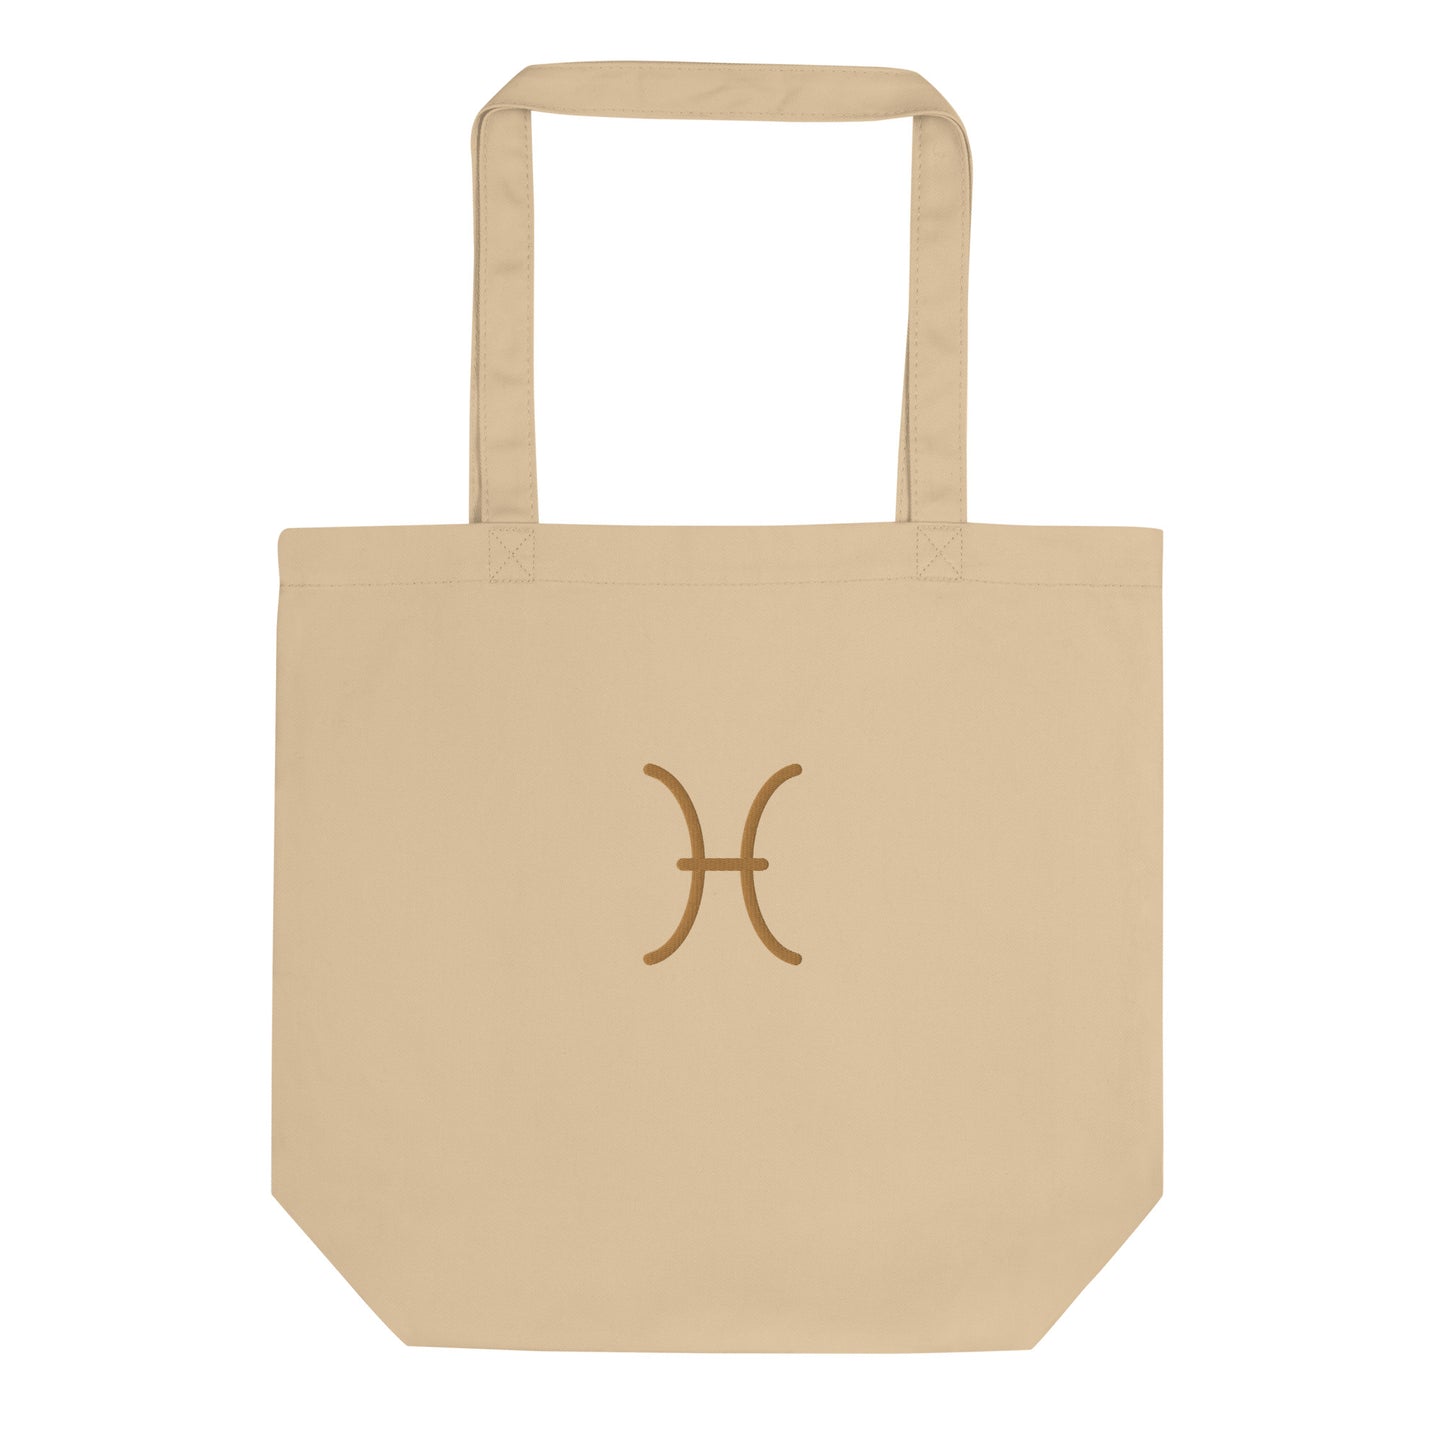 Pisces - Small Open Tote Bag - Gold Thread